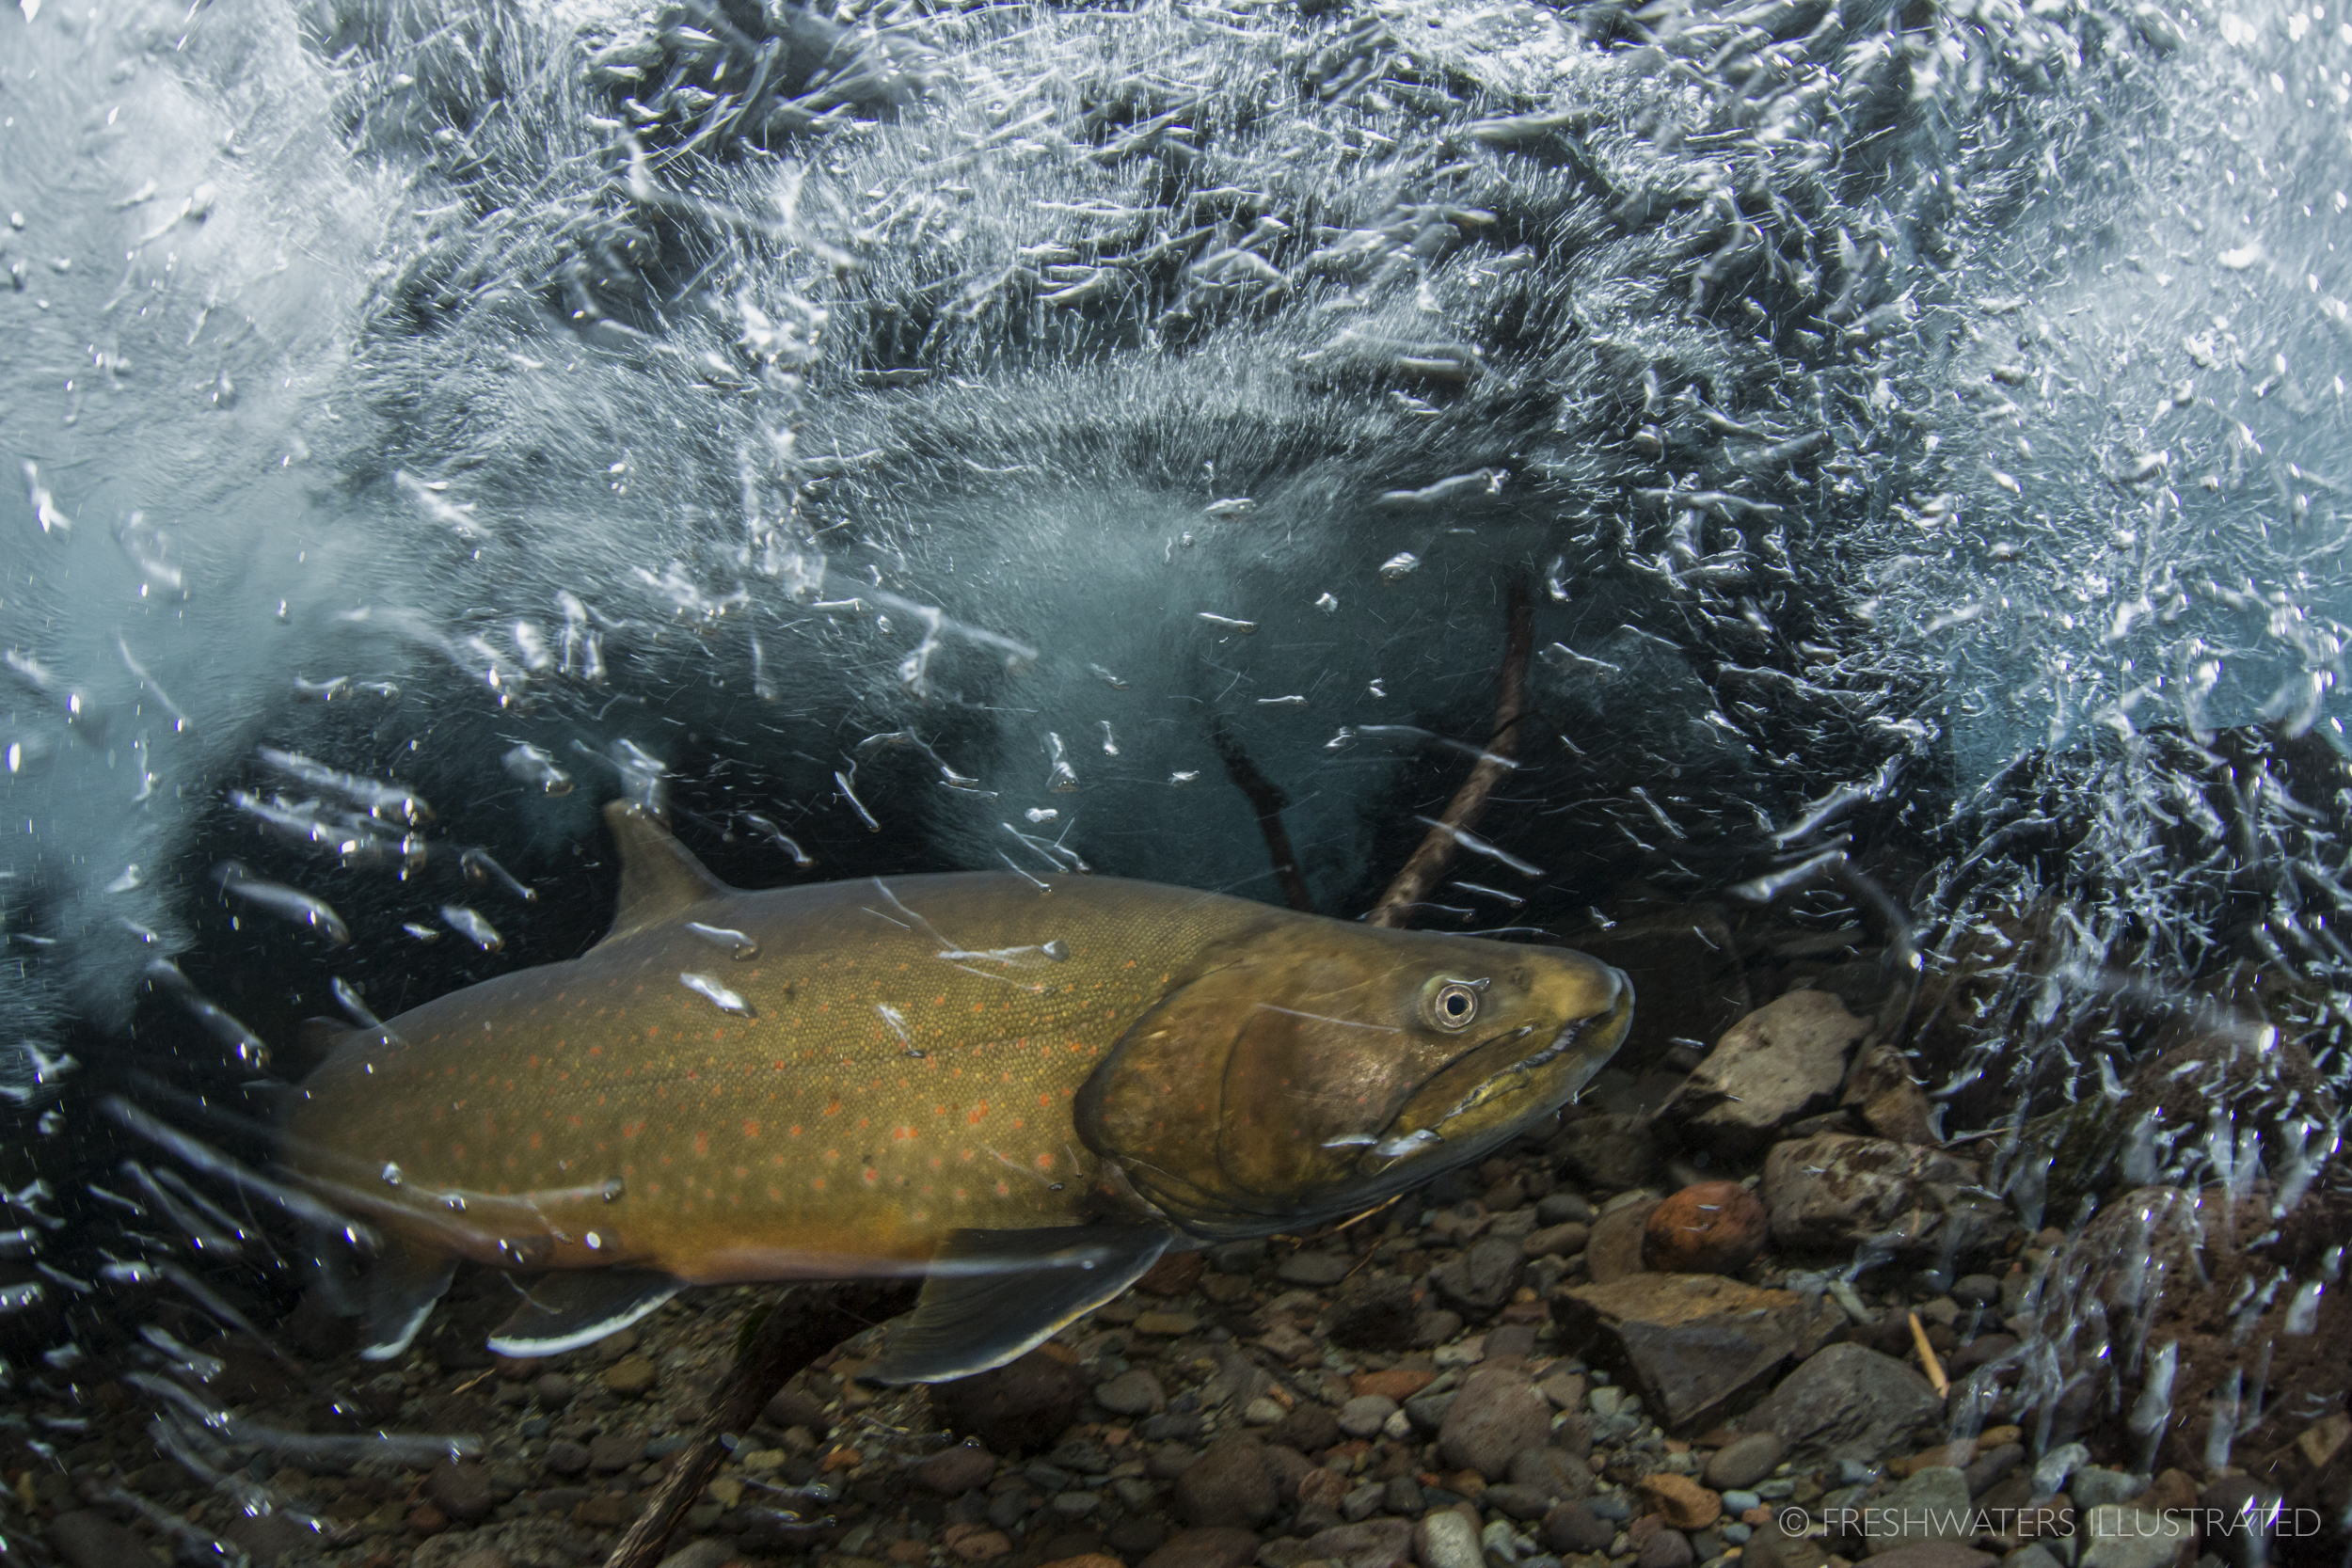  A large male bull trout (Salvelinus confluentus) fights the swift currents of a clear, cold Cascade spring stream. A Federally Threatened species, bull trout require the cleanest and coldest water to persist. Roaring River, Oregon  www.FreshwatersIl